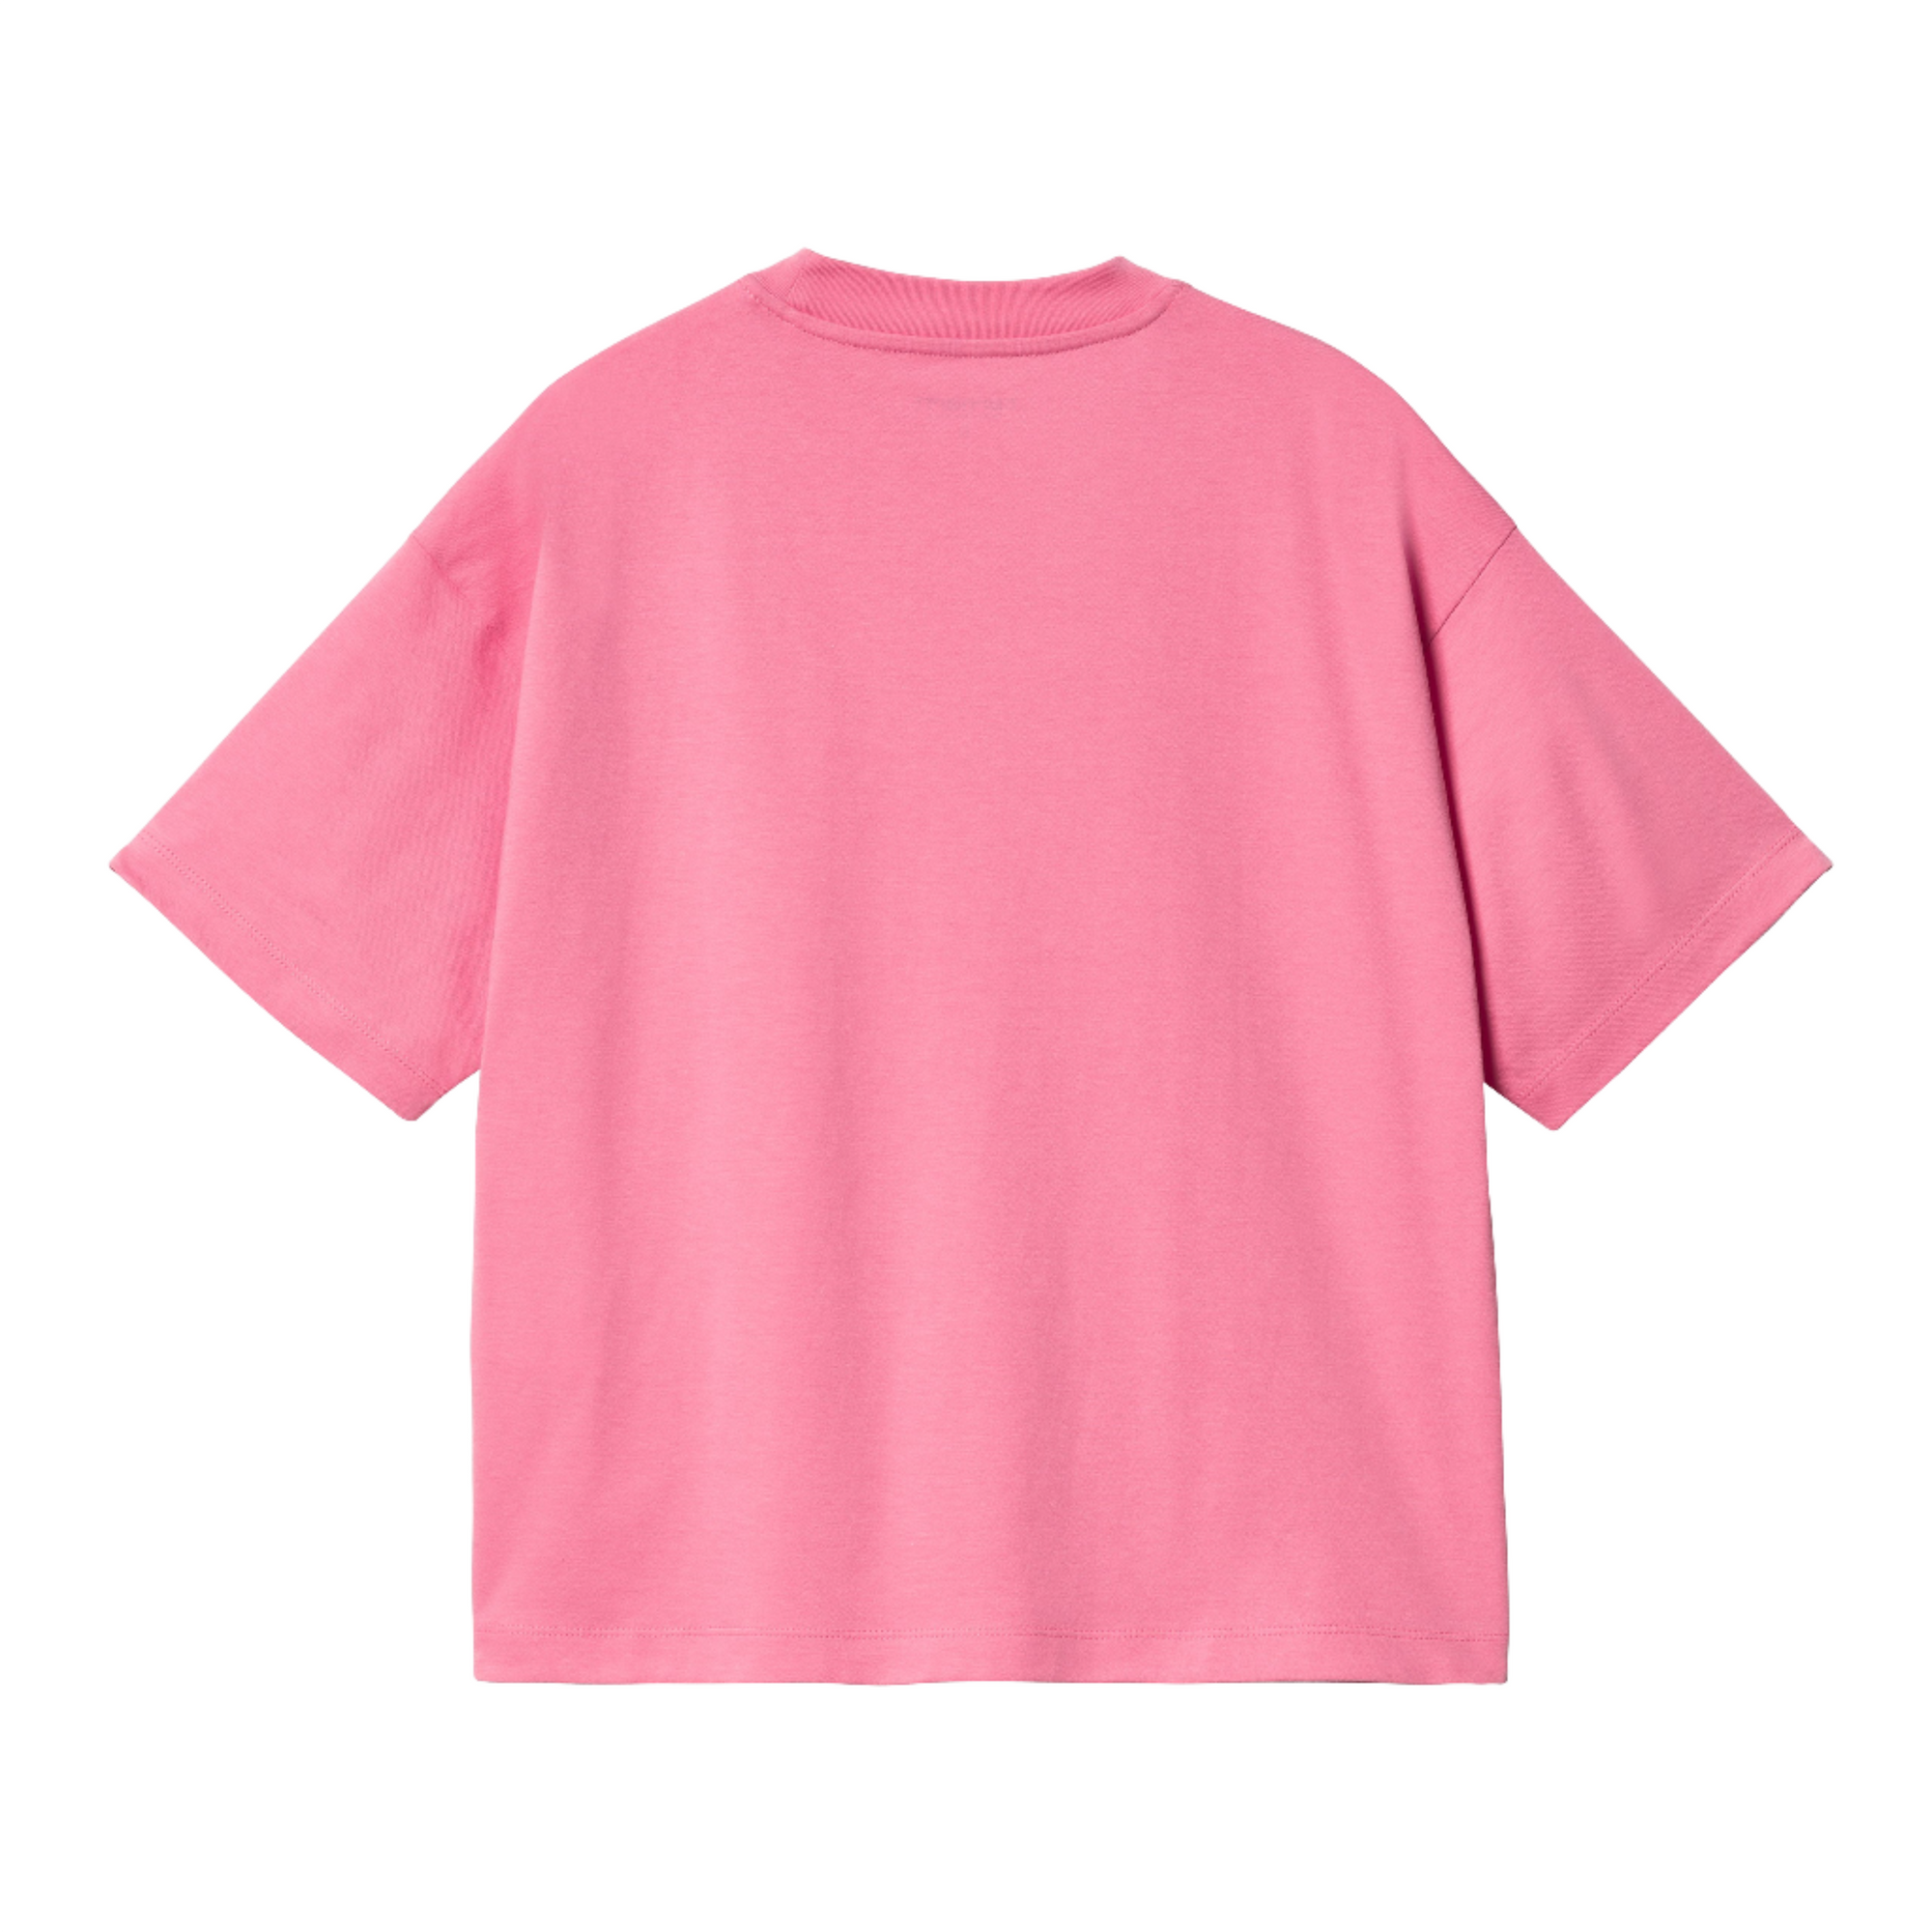 W' S/S CHESTER T-SHIRT / CARHARTT WIP / CHARM PINK